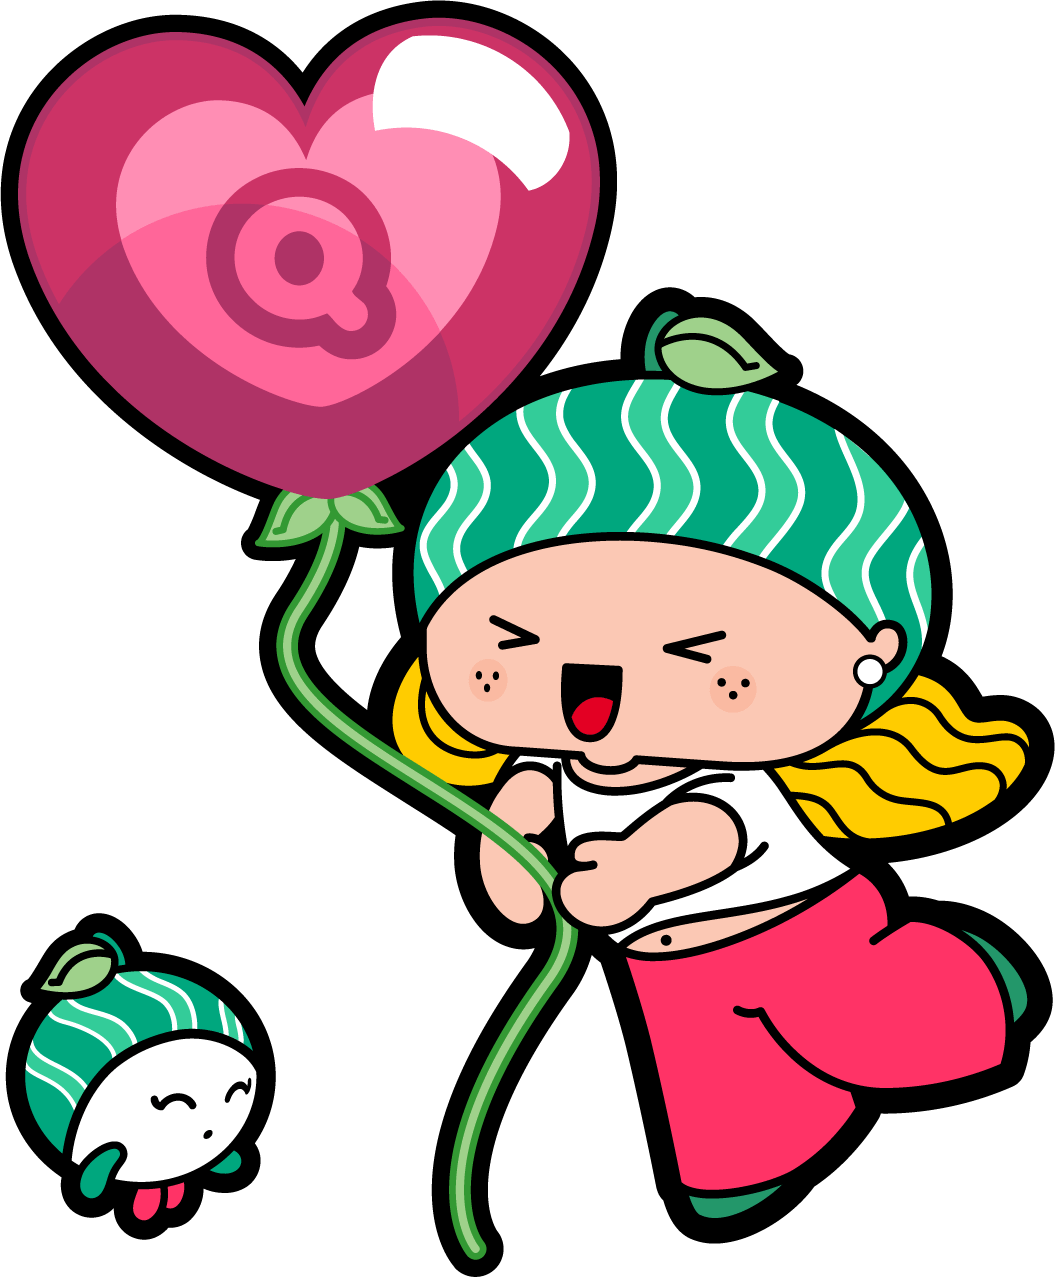 Melly is a girl with tanned skin, long, wavy blond hair and freckles on her cheeks. She wears a white t-shirt with a watermelon slice print on the front, pink trousers, green sneakers and also wears a watermelon hat with a green leaf on top. In the picture she is holding a pink balloon in the shape of a heart, with the letter 'Q' (from Qui Qui Biscuit®) in the middle of the balloon. Seesy is white and looks like a ball with two little green arms and two pink legs. She is about the size of a handball. Like Melly, she also wears a watermelon hat with a green leaf on top. In the picture she is next to Melly.